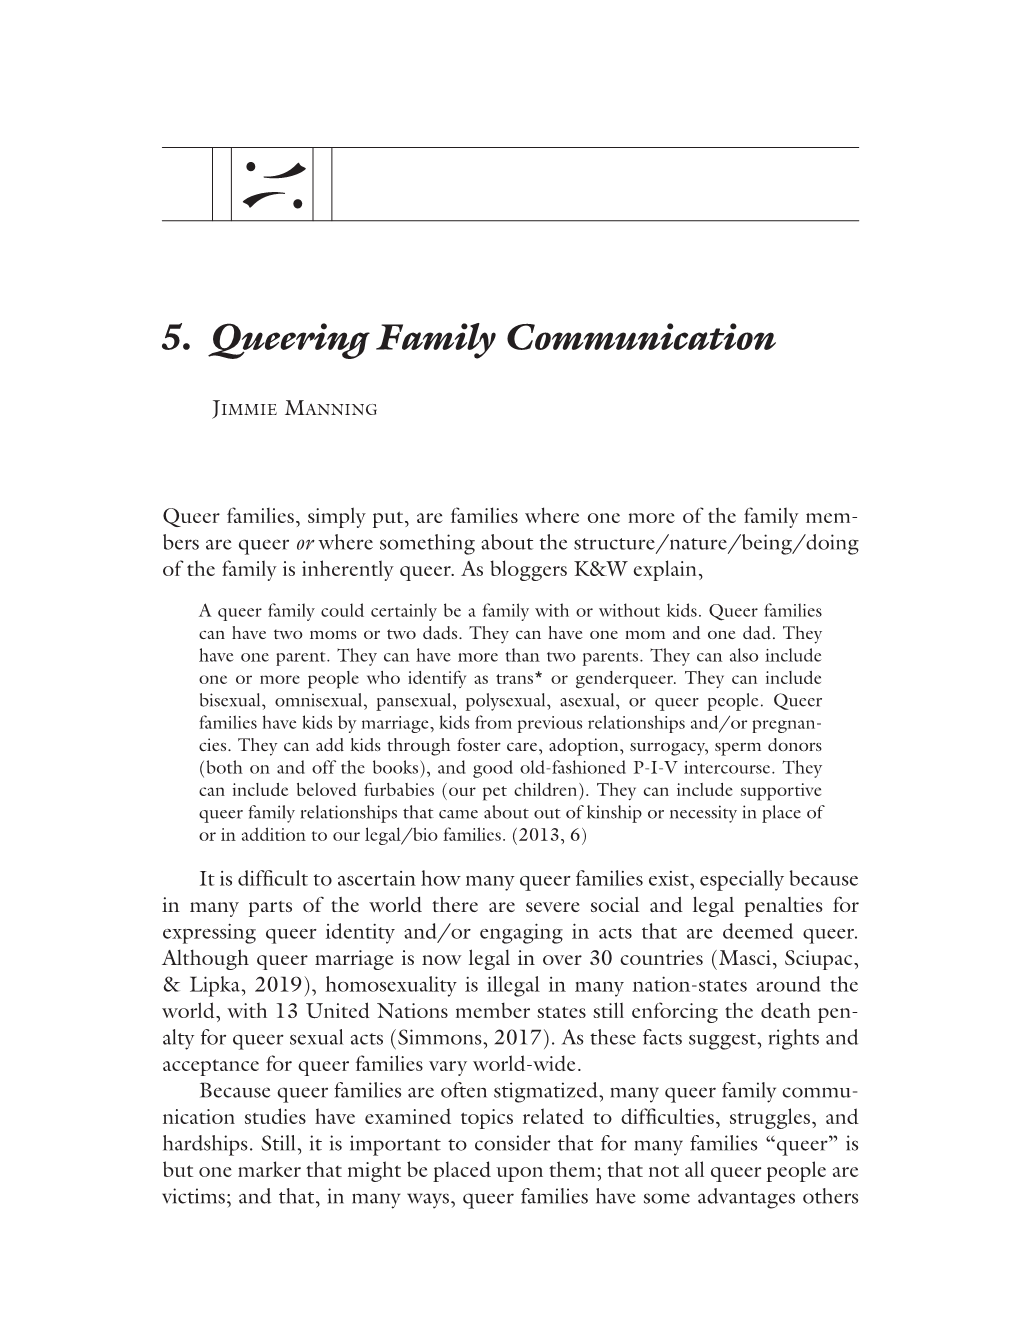 Queering Family Communication